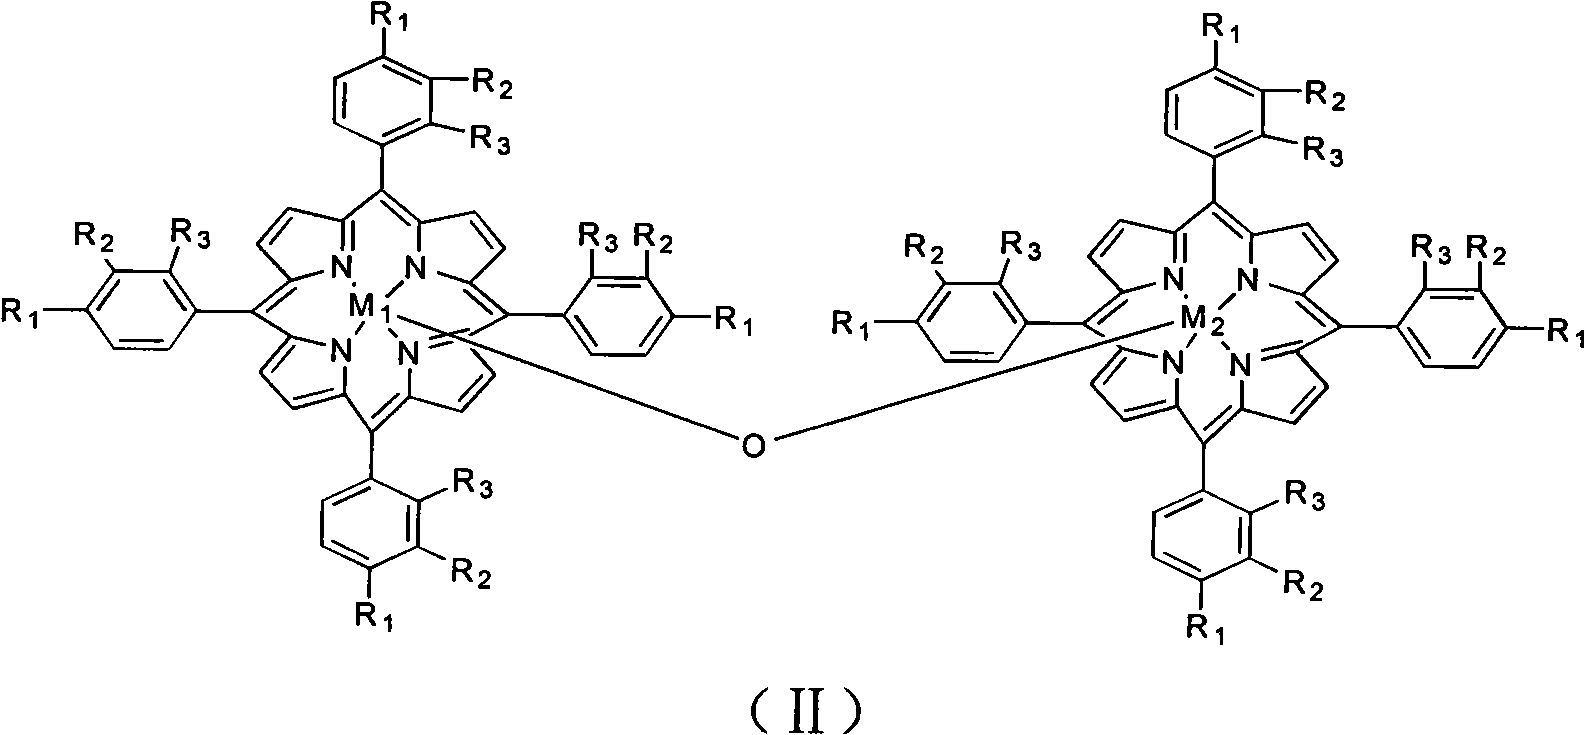 Process and equipment for preparing adipic acid by catalyzing air and oxidizing cyclohexane